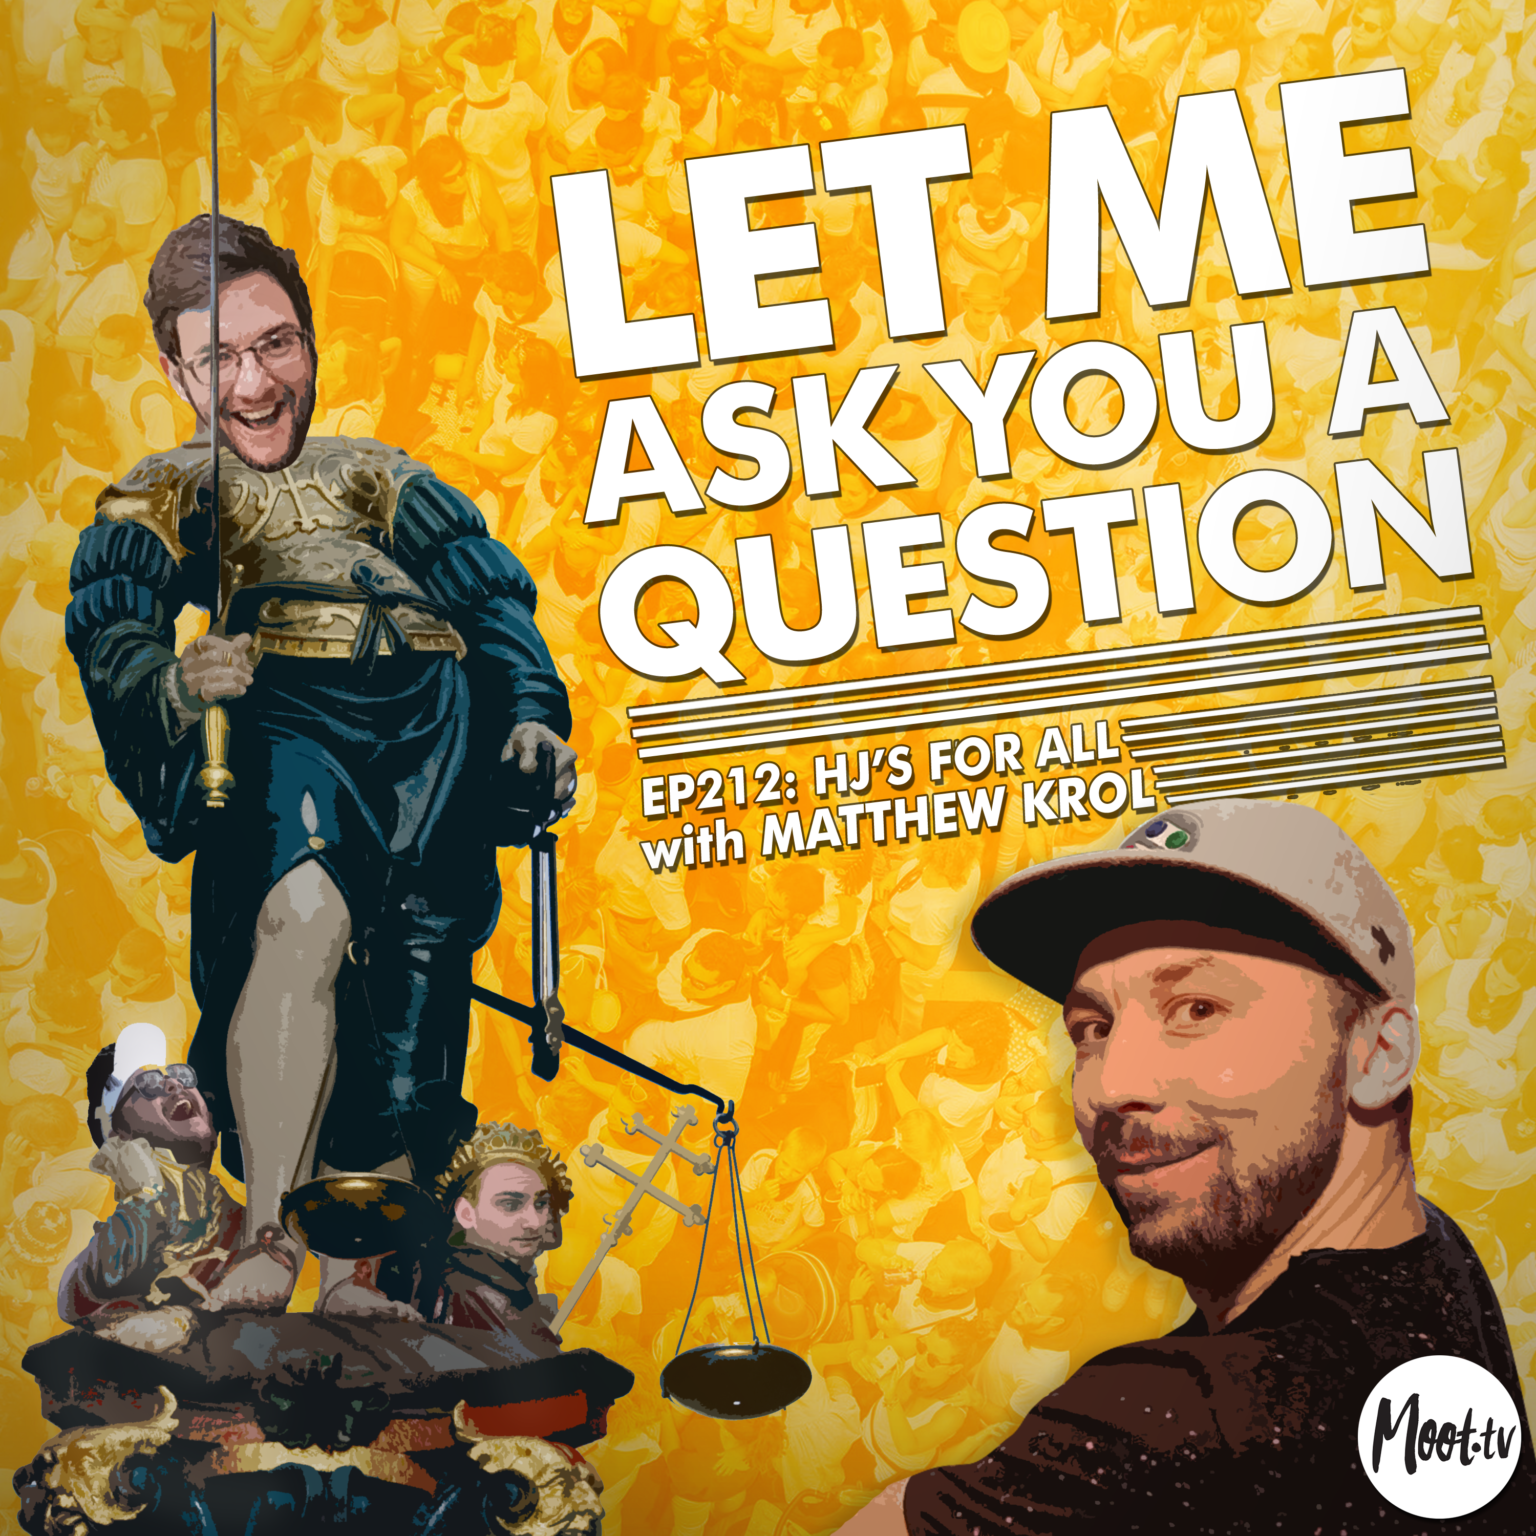 Episode 212 HJ's For All with Matthew Krol - Let Me Ask You A Question Podcast